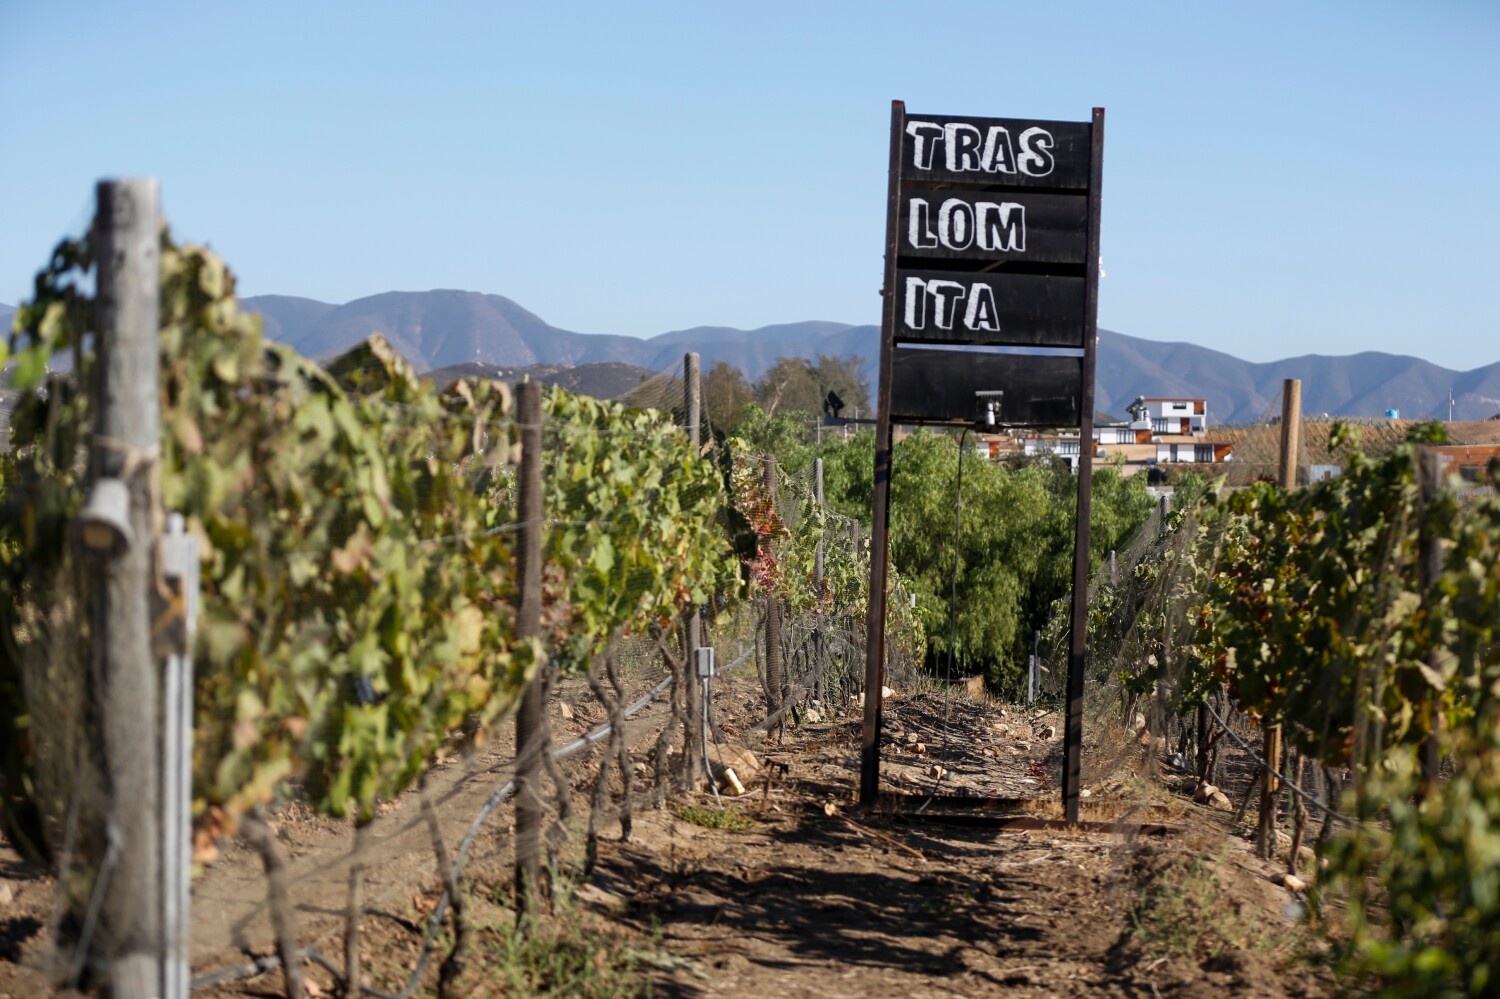 Podcast: Mexico's wine country gets big — maybe too big